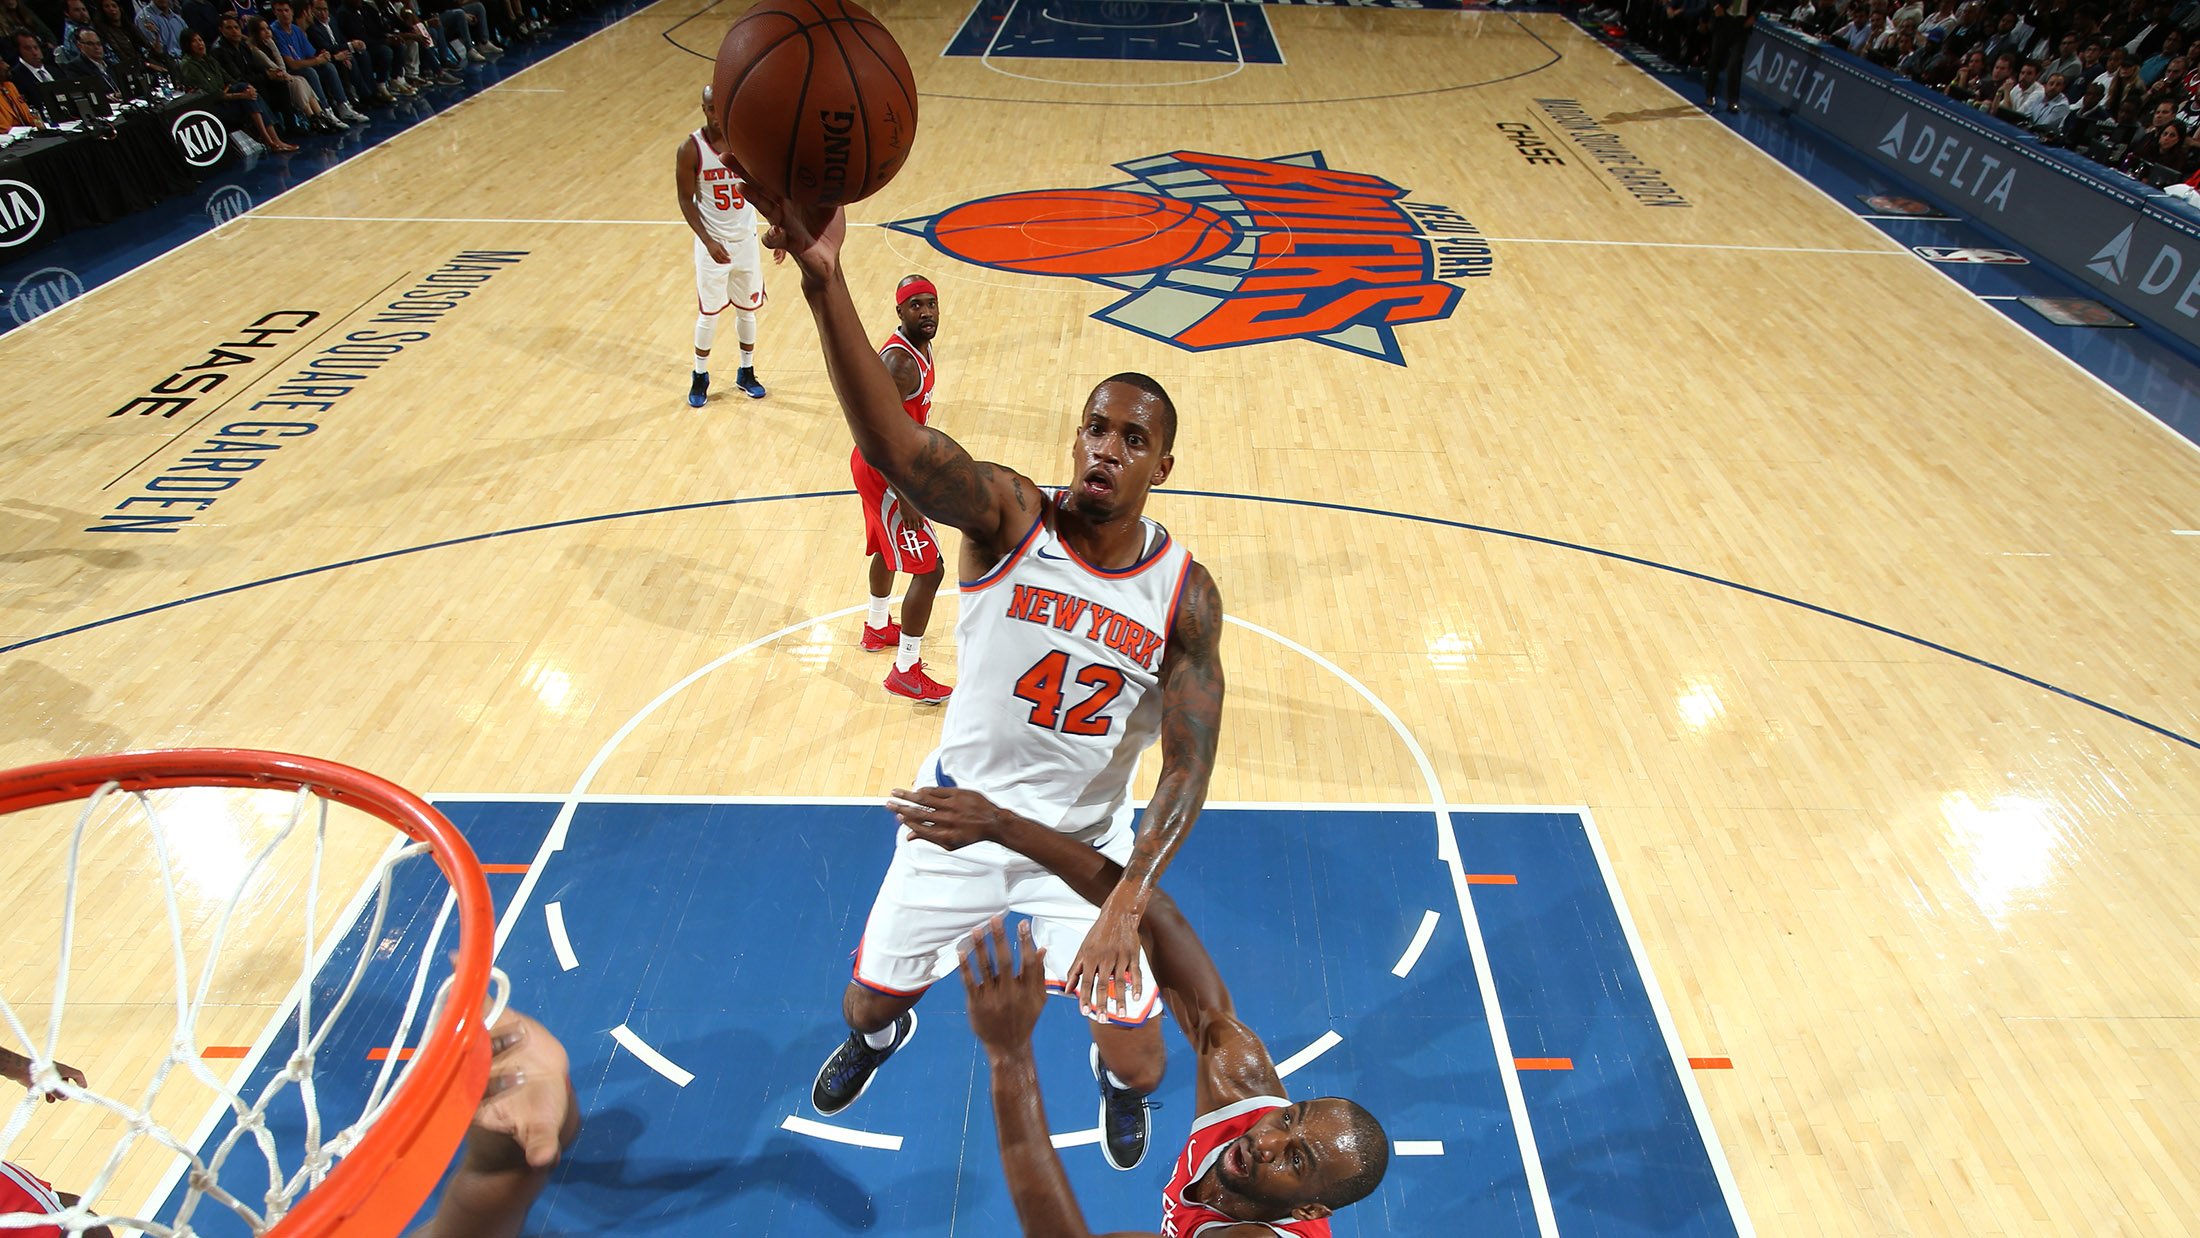 Squarespace Becomes First Knicks Jersey Sponsor - CBS New York